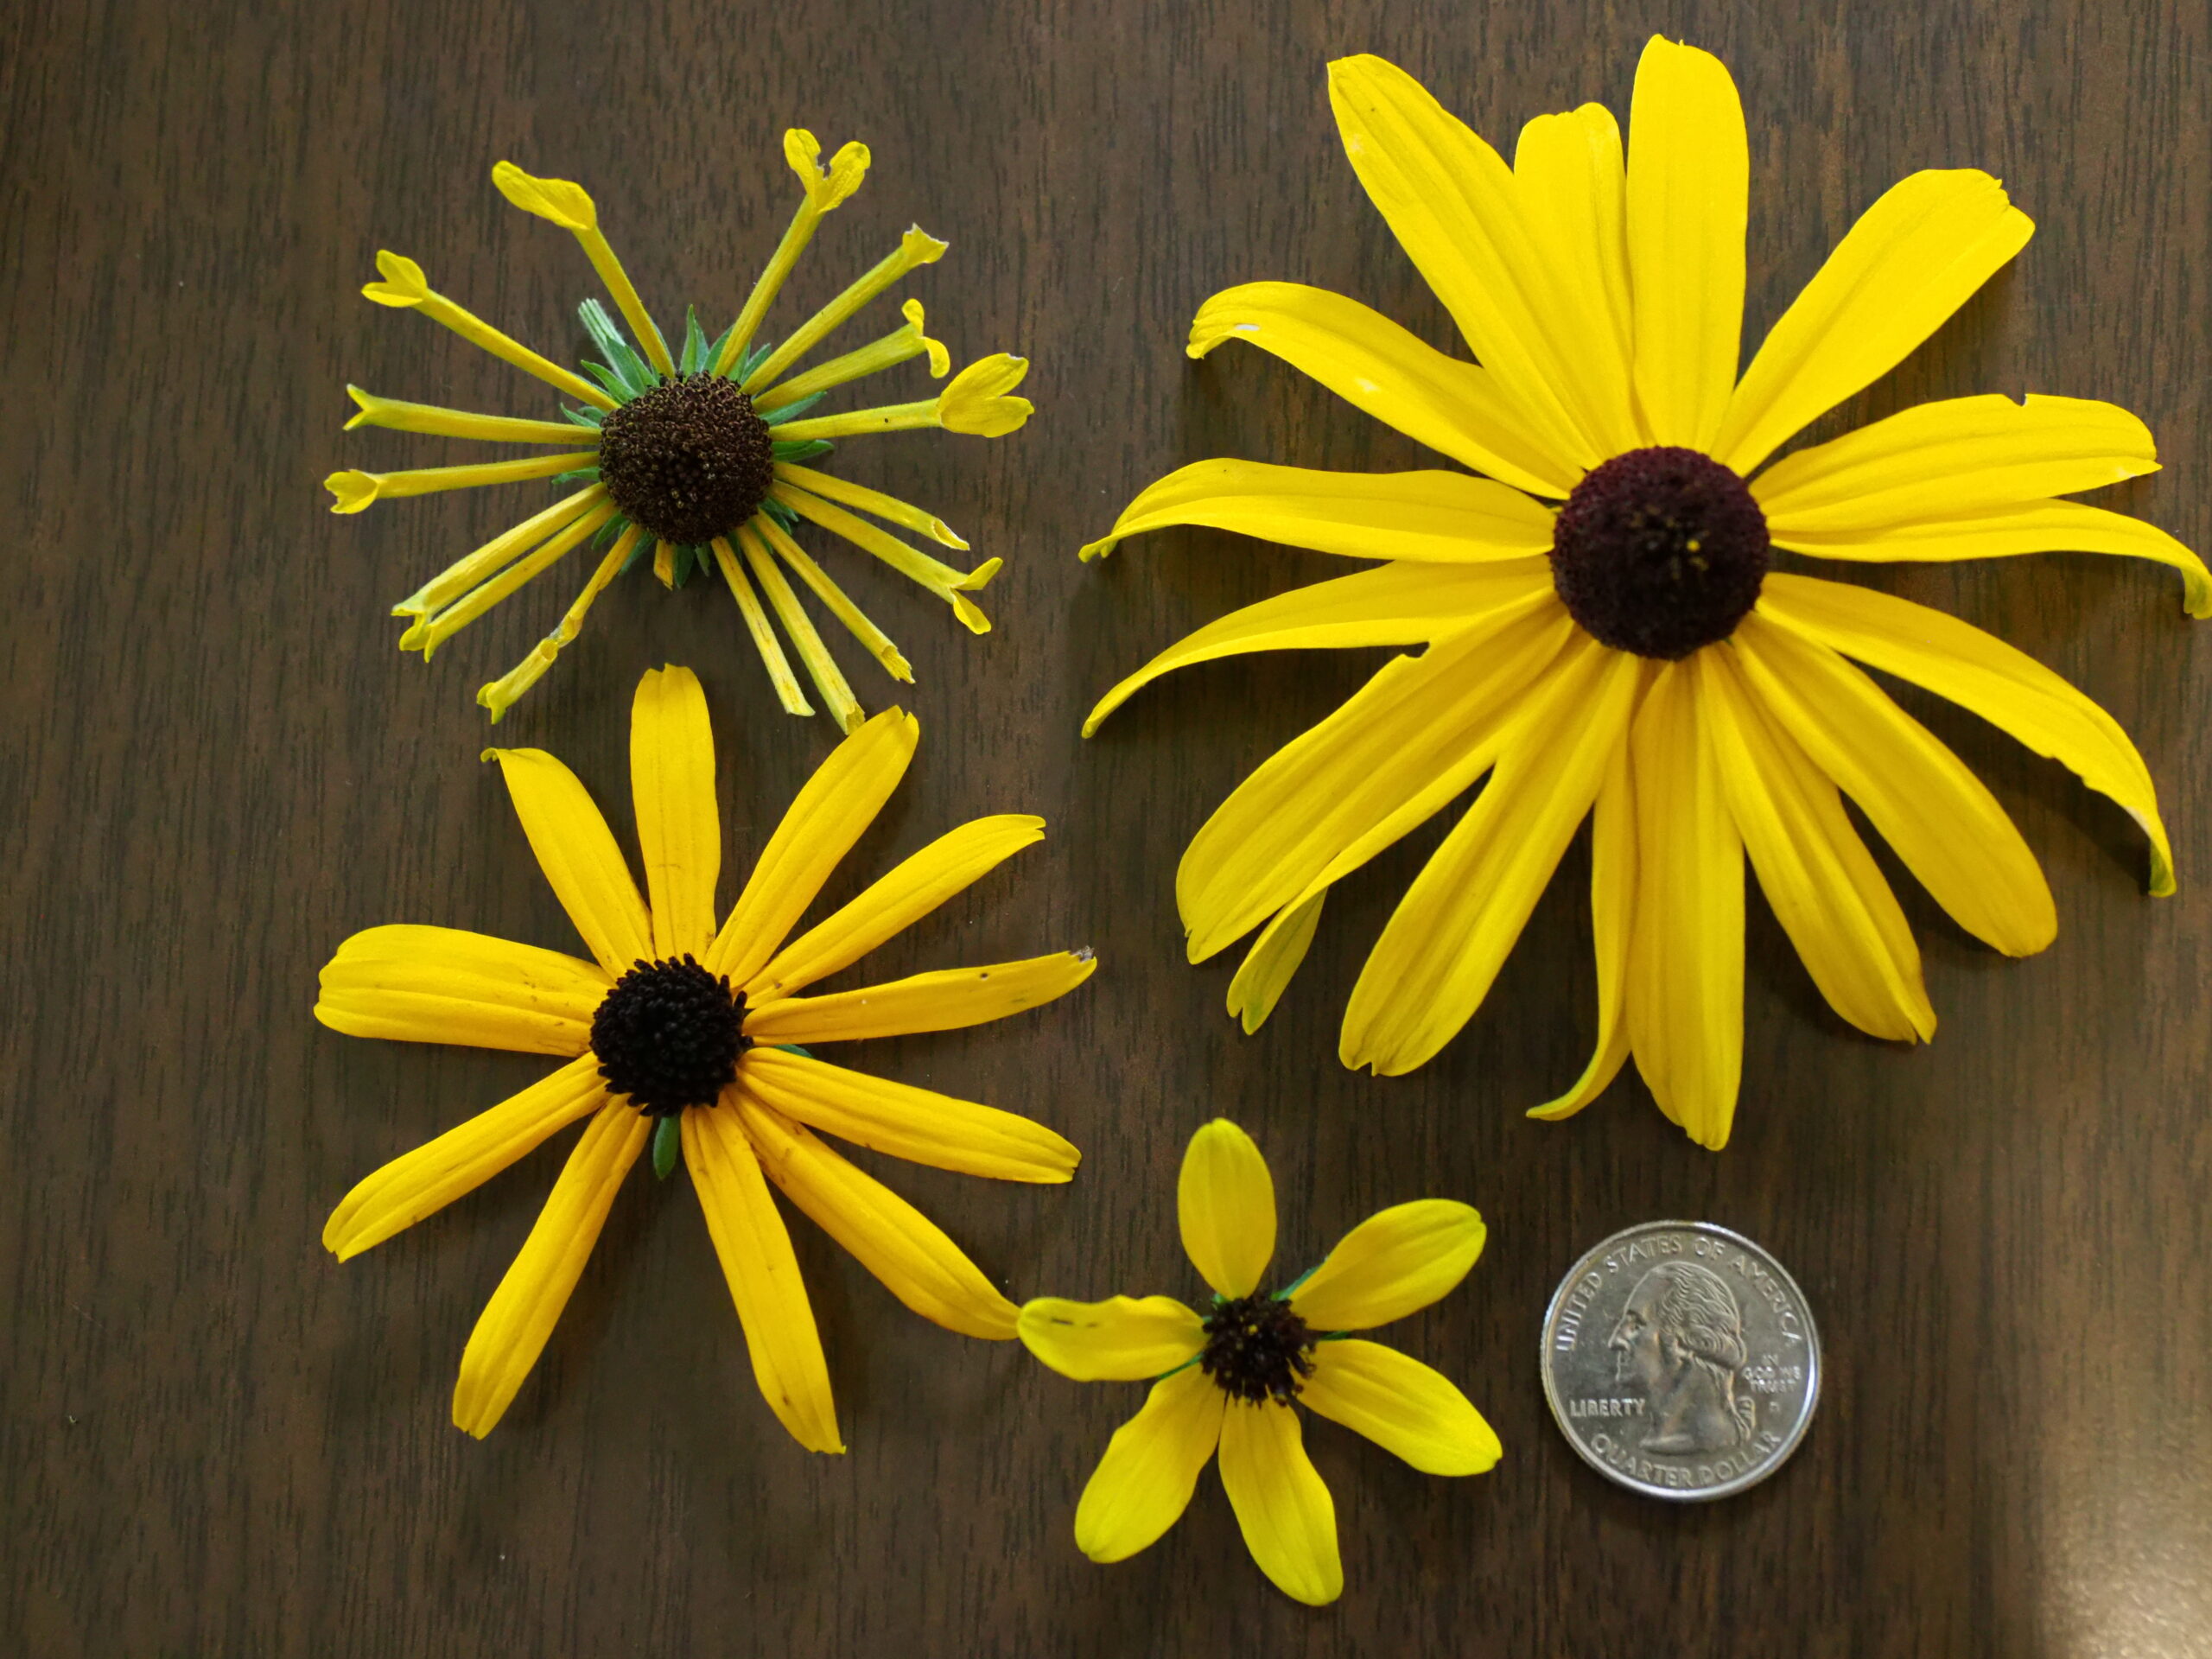 Four types or species of Rudbeckia, but all share the same basic form and the central brown- or black-eyed Susan center button. Top left is R. Henry Eilers, which has tubular rays with a 